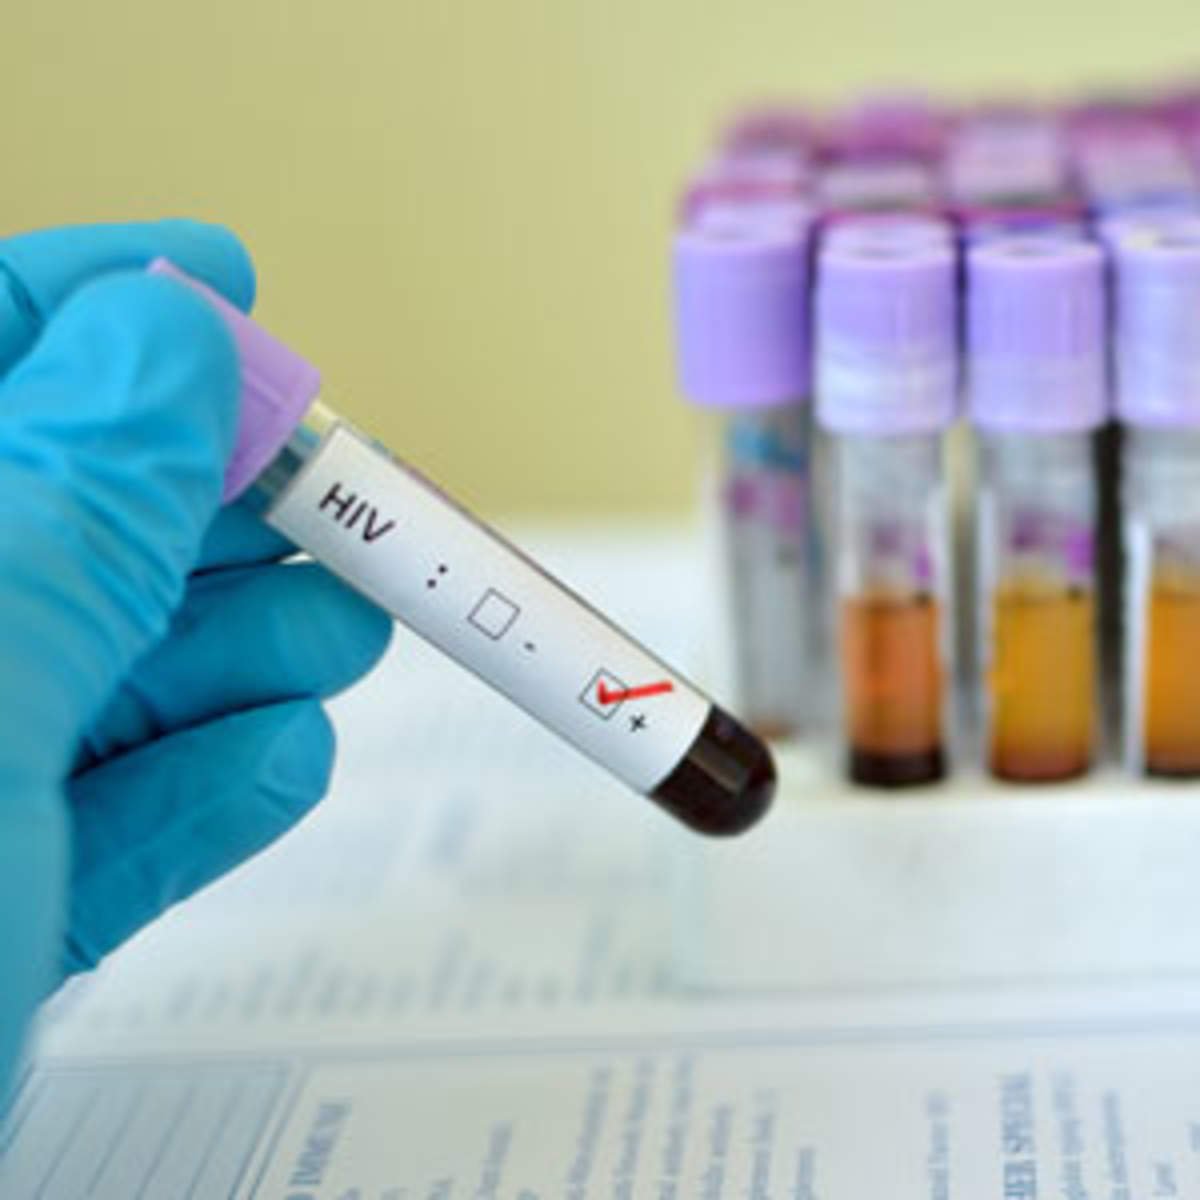 Can a Regular Blood Test Detect HIV?